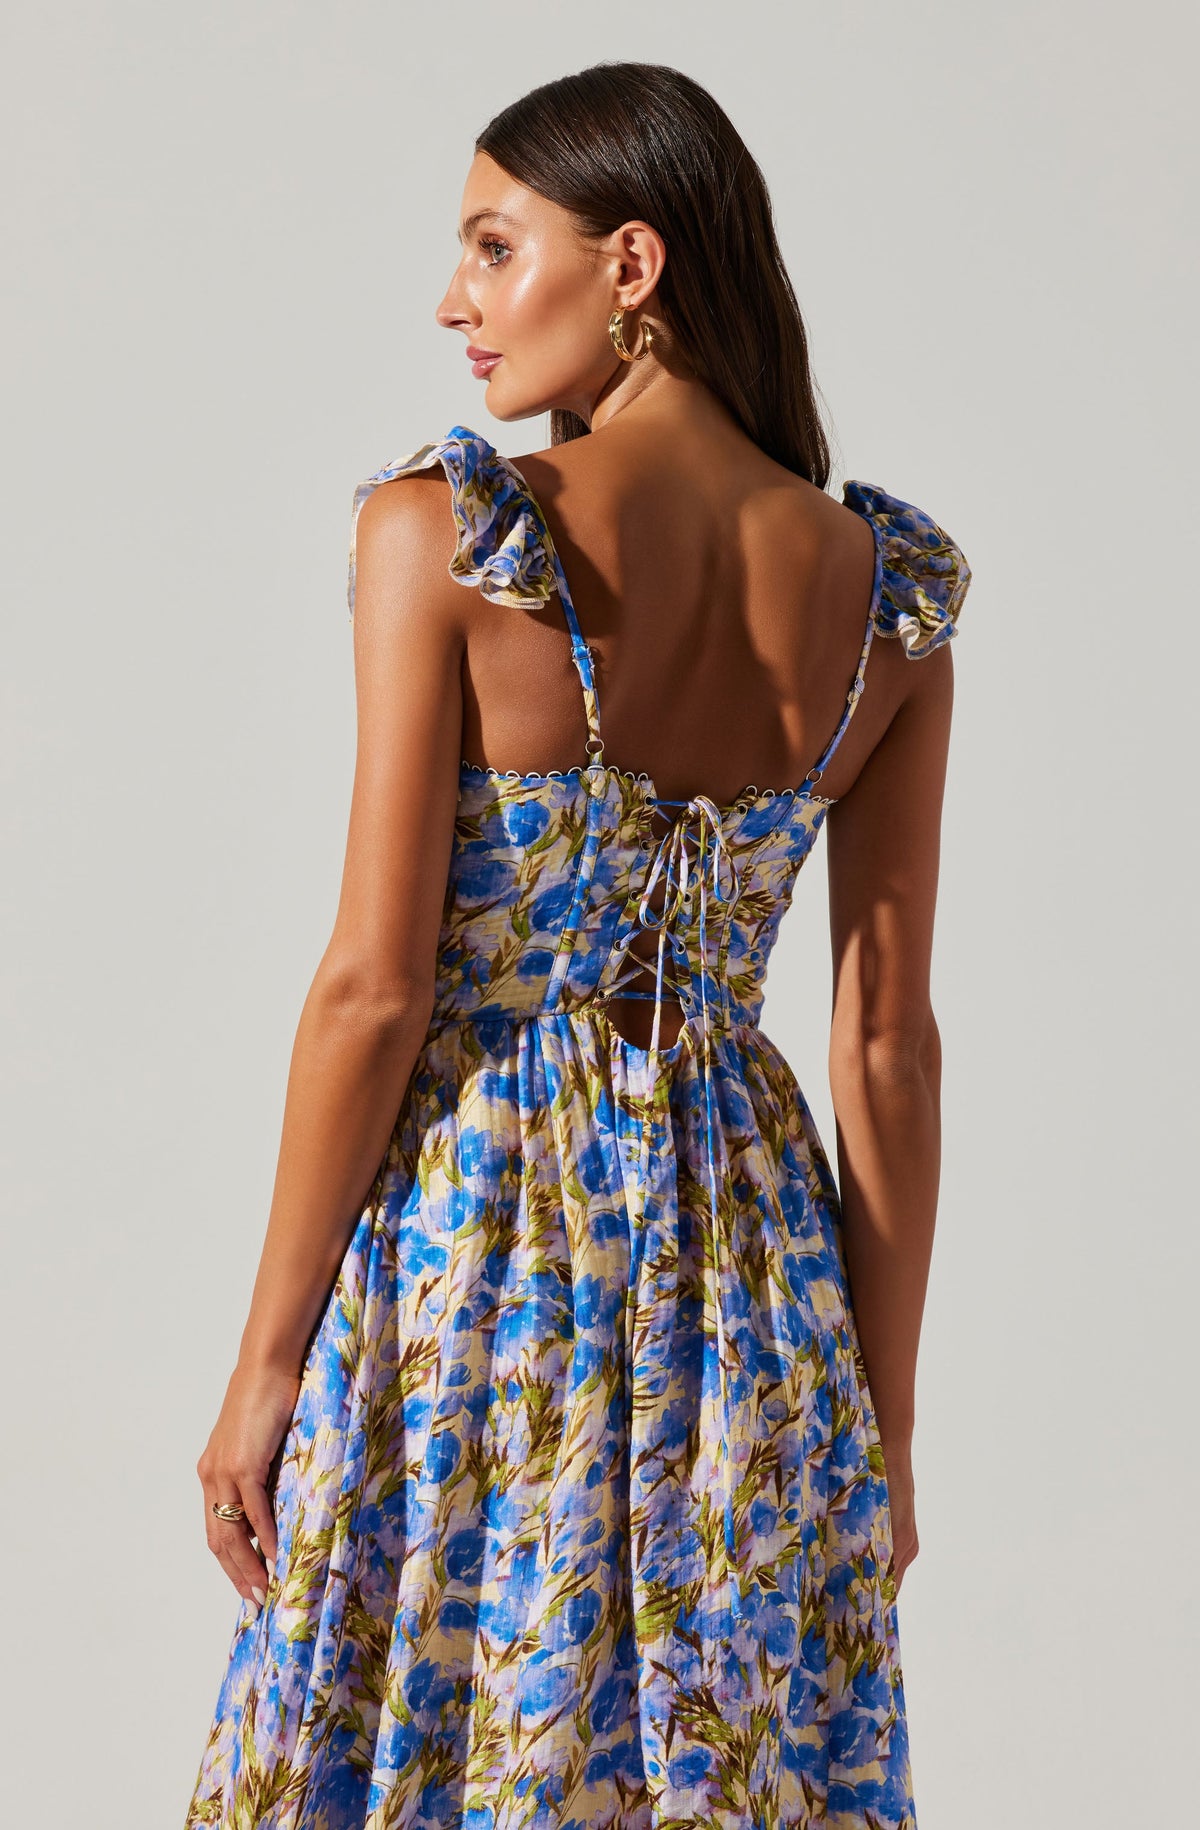 Colorful Floral Bustier Dress with Ruffle Hem